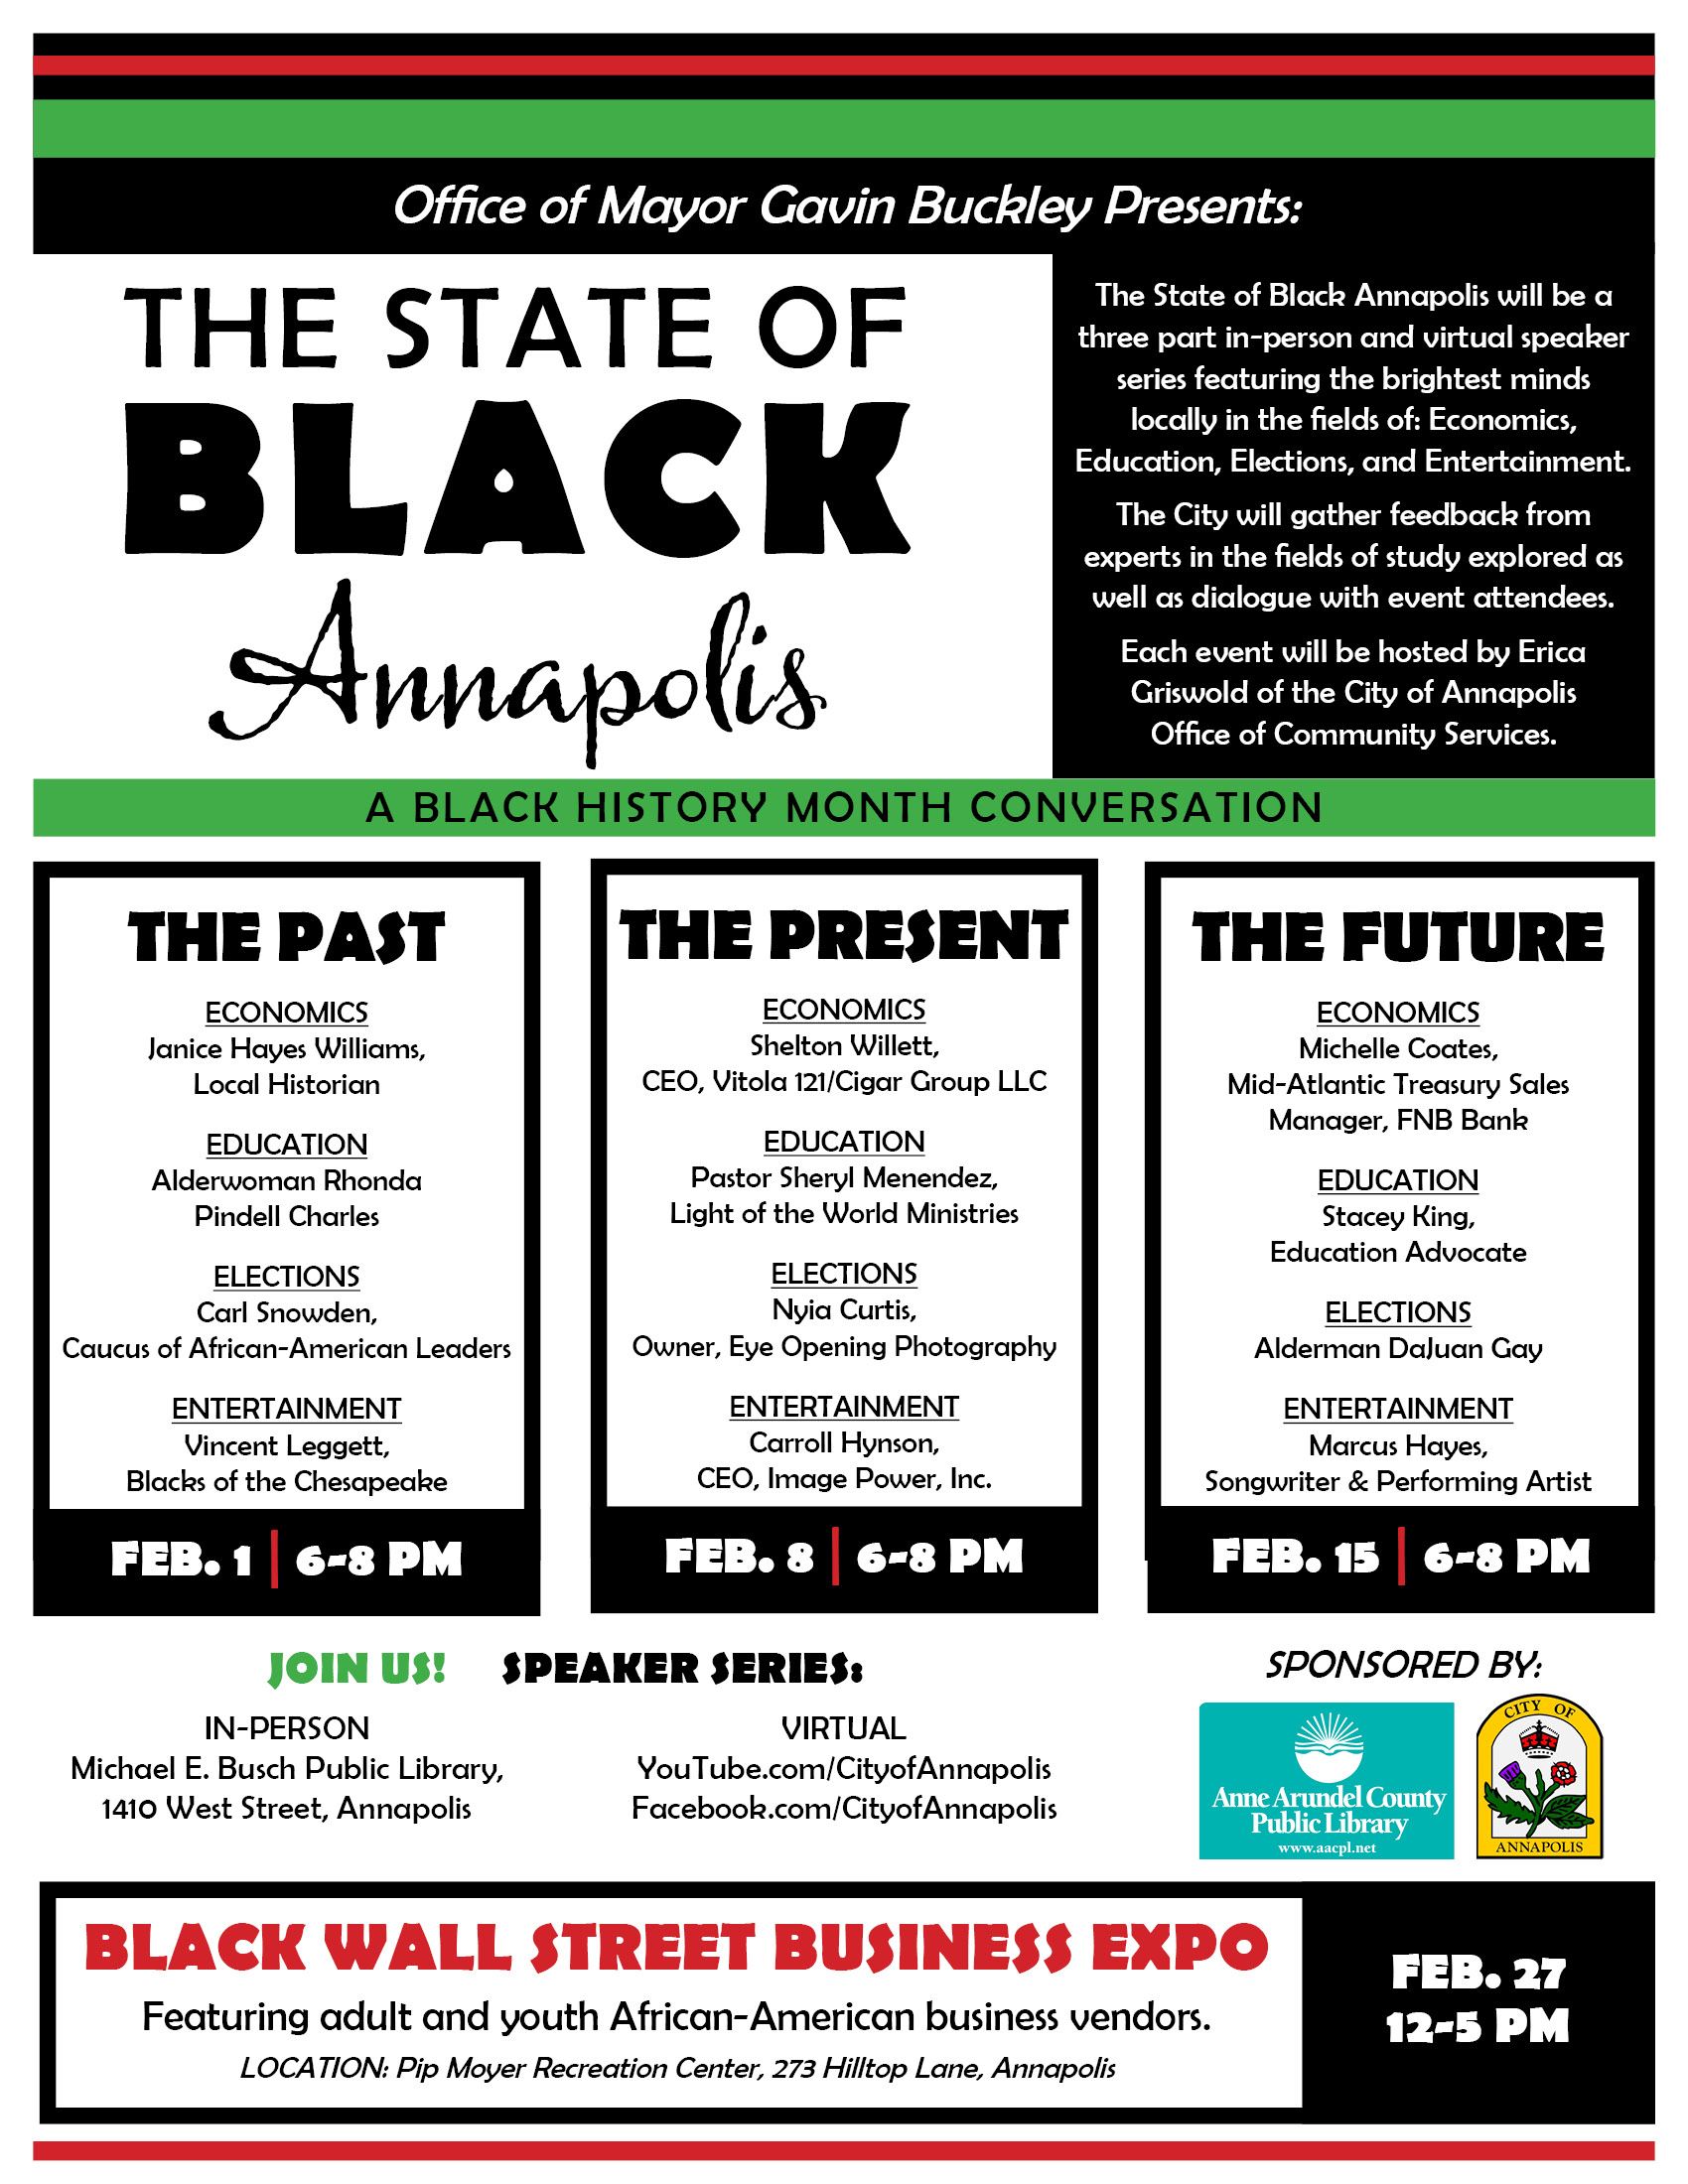 Information about the State of Black Annapolis as outlined in the post